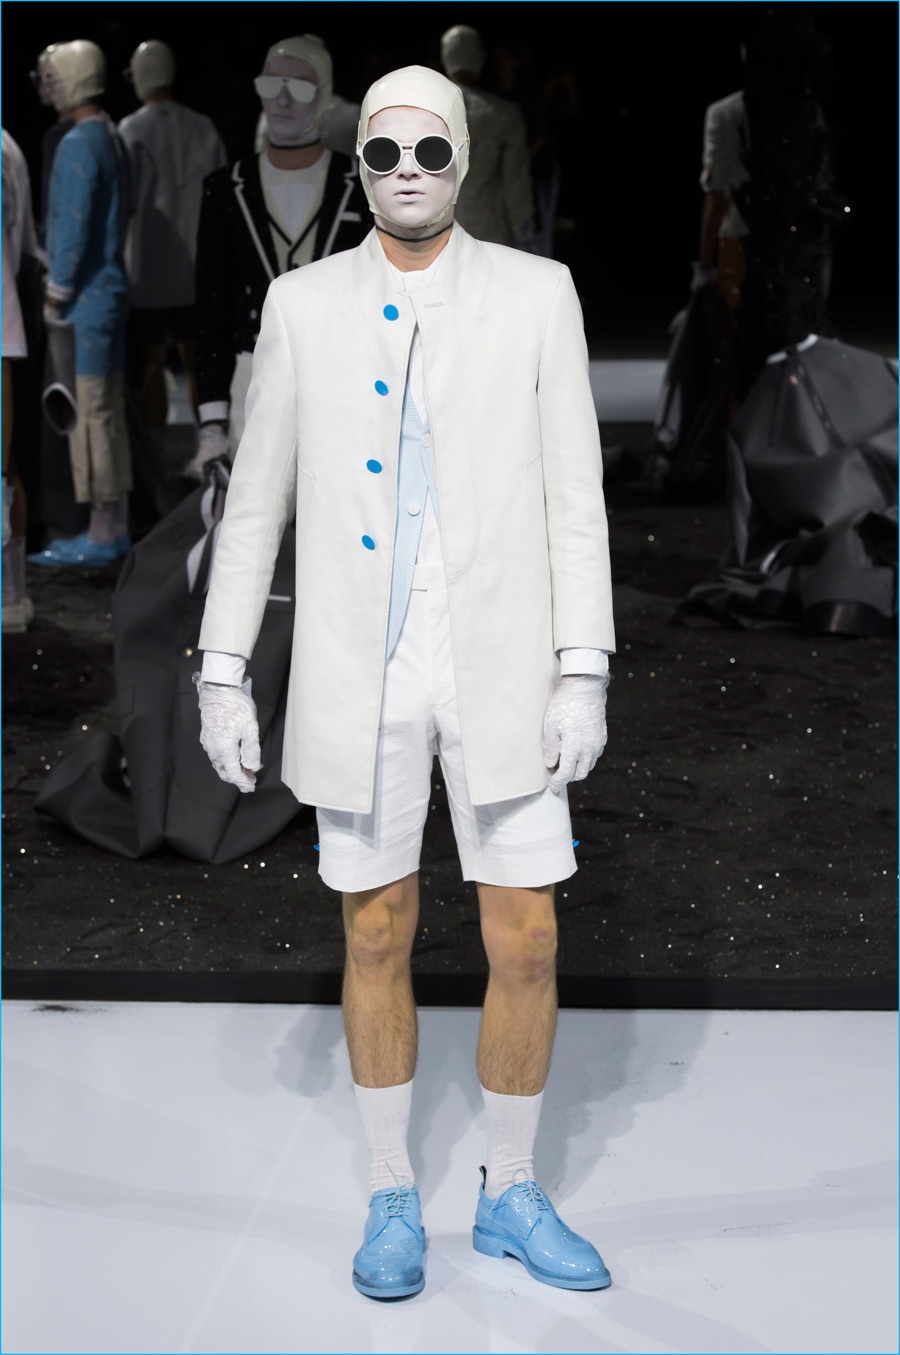 Thom Browne 2017 Spring/Summer Men's Runway Collection